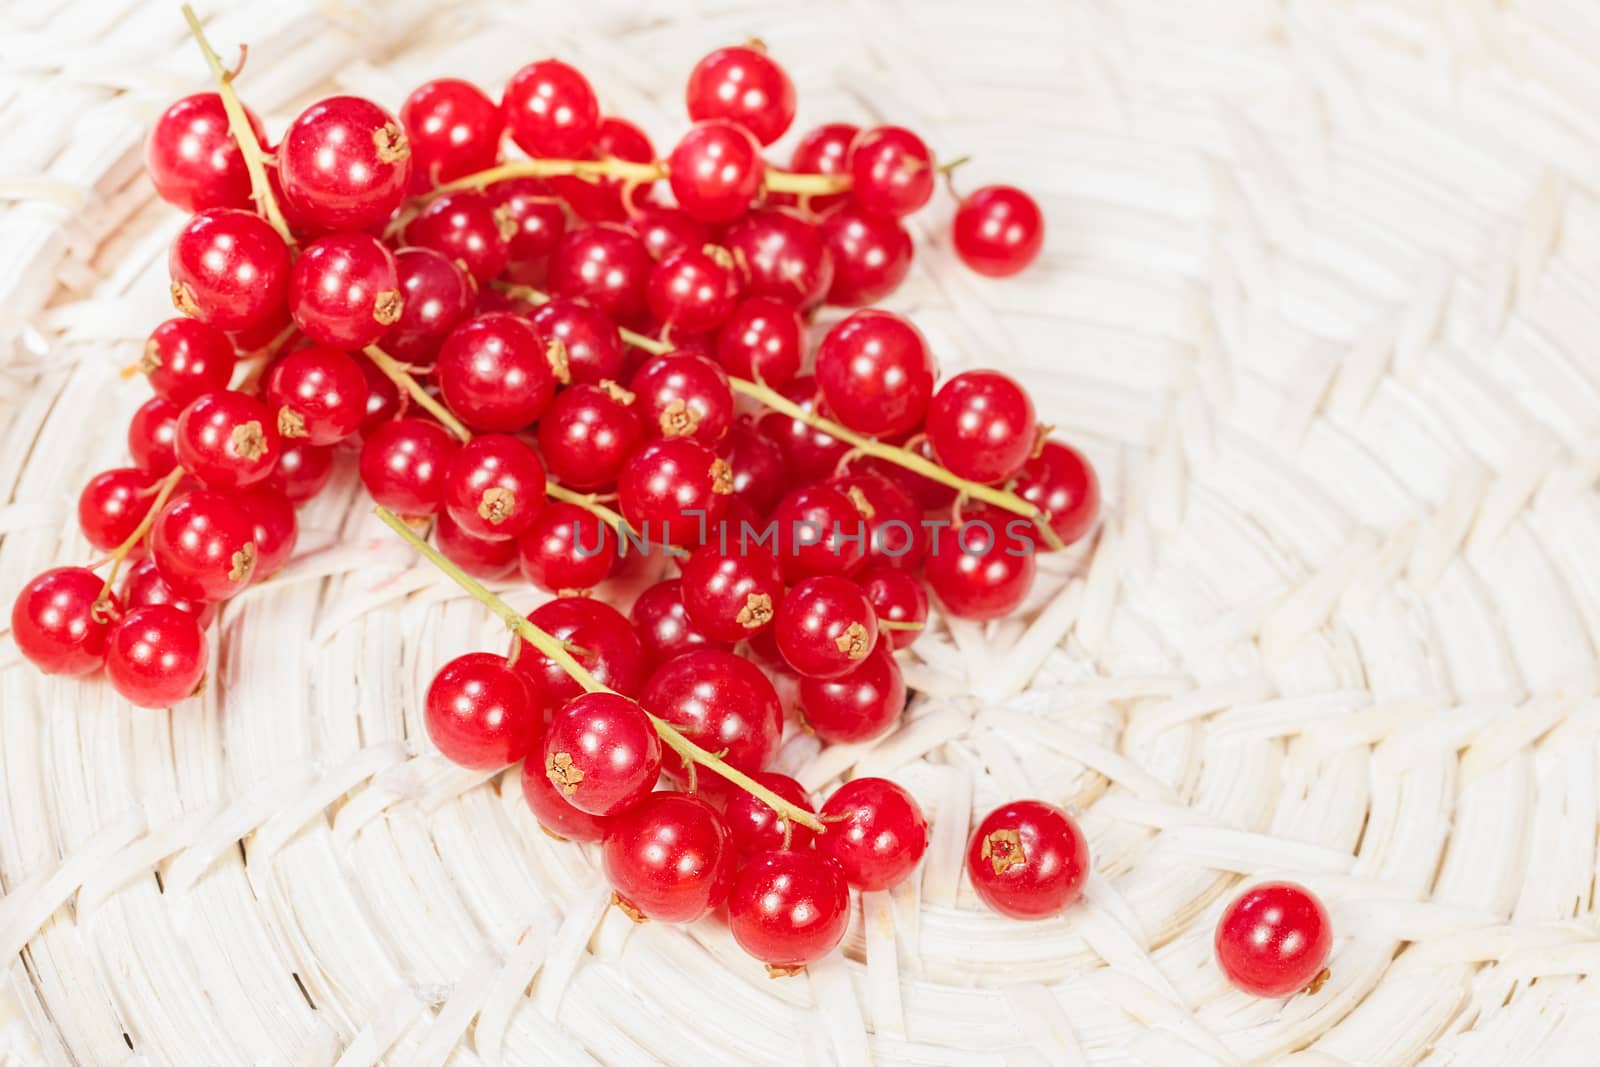 Red currants. by Slast20